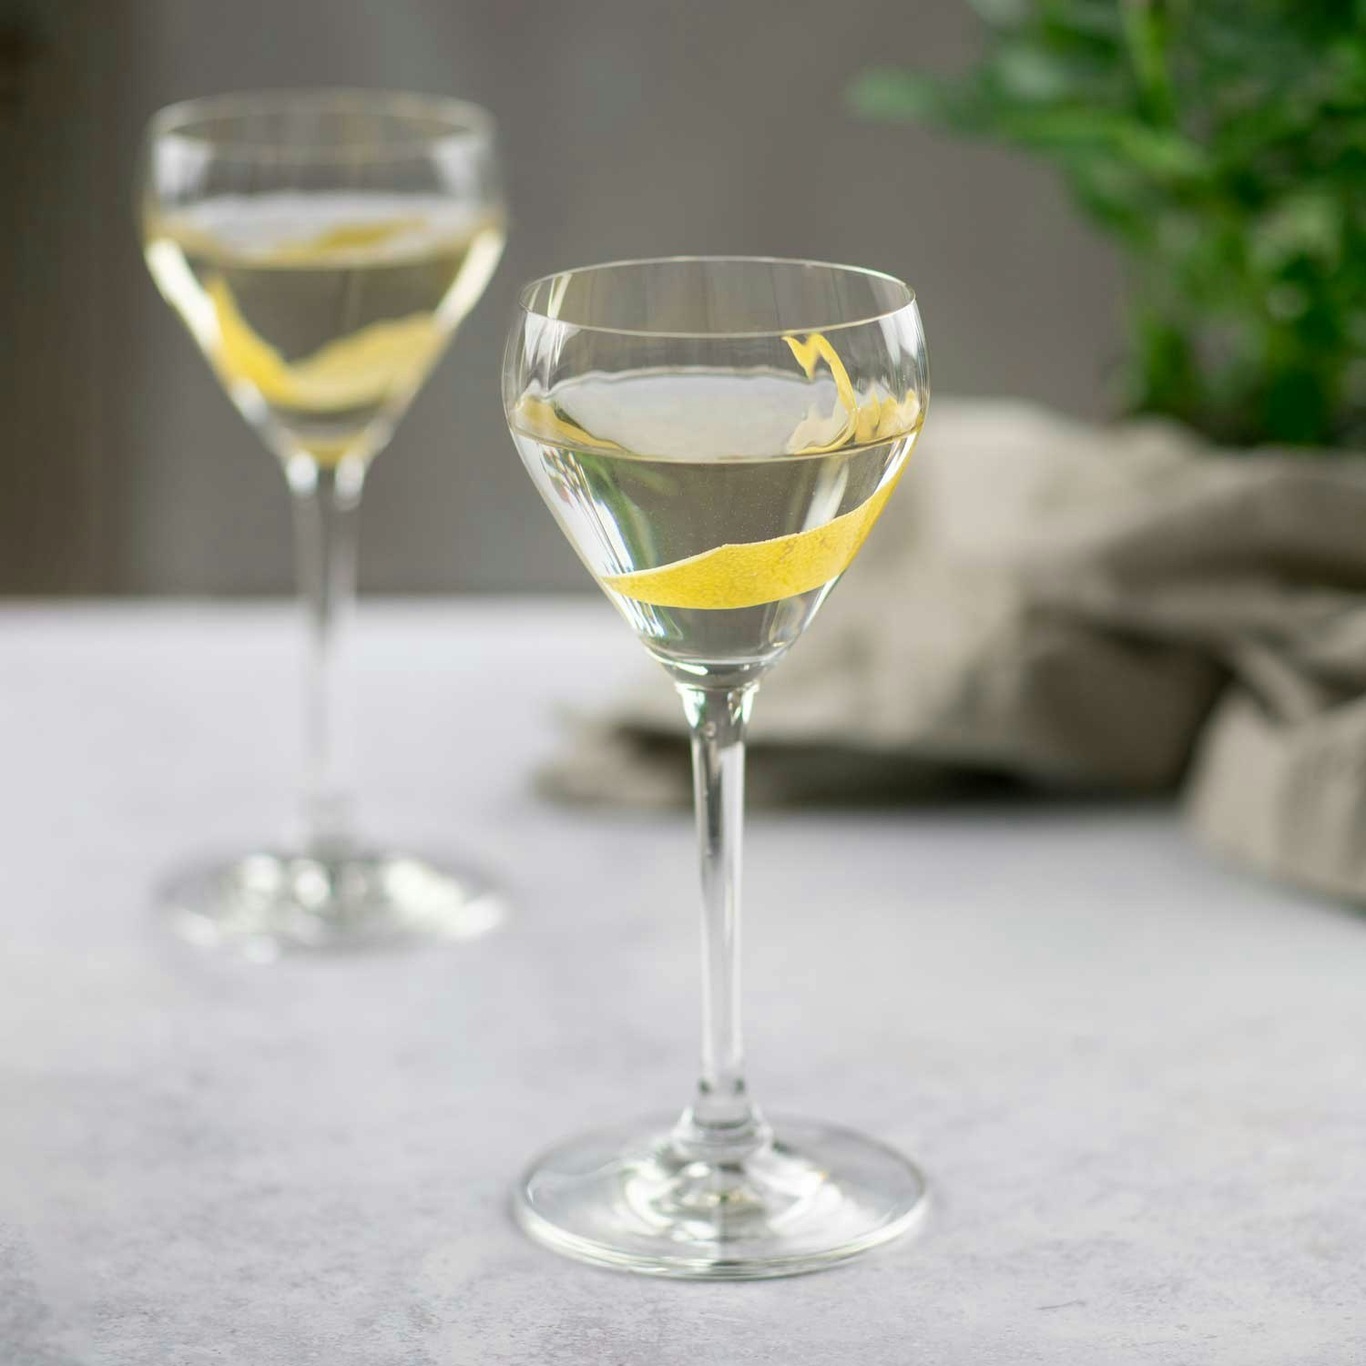 https://royaldesign.com/image/11/riedel-drink-specific-nick-nora-drink-glass-2-pack-20-cl-0?w=800&quality=80